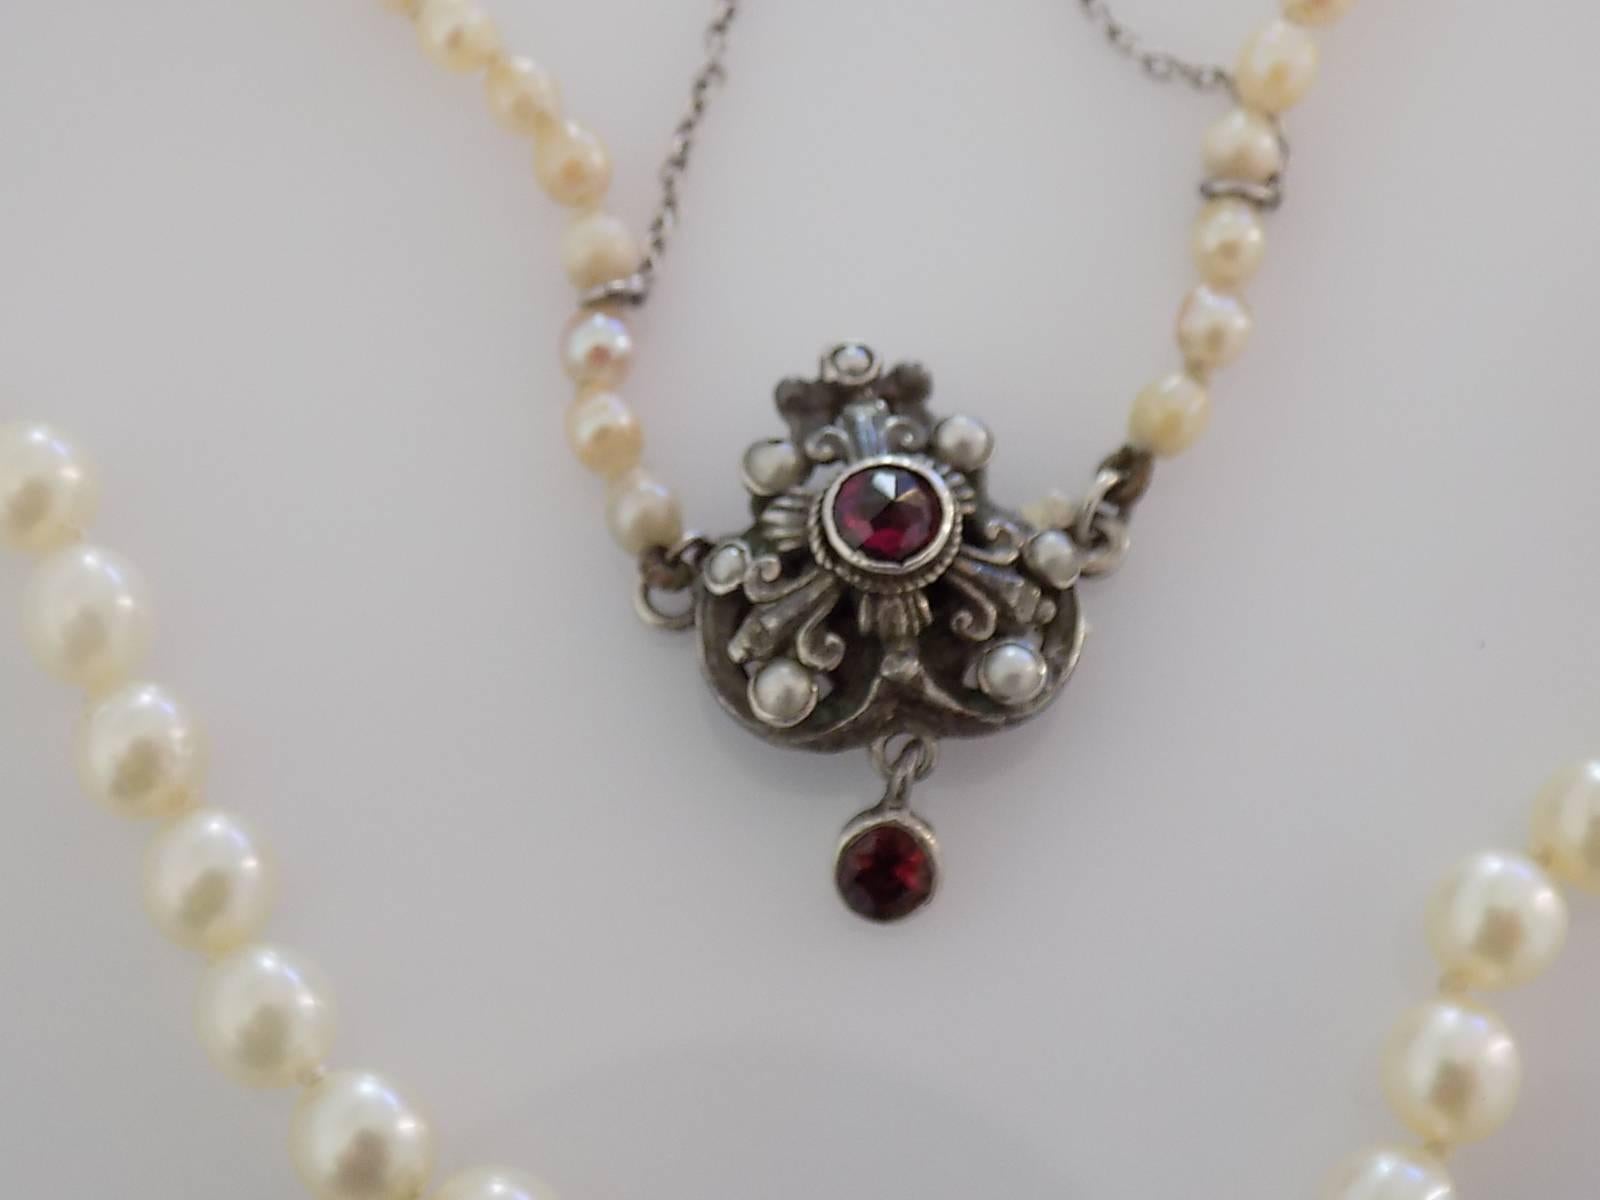 
An Antique early 1900s Pearl chocker necklace on a beautiful Sterling Silver, Garnet and split Seed Pearl clasp.
Total length including clasp 15 Inch. 
Pearls approx. from 3mm and 6mm.
Weight 15.1gr.
Marked 925 for Sterling Silver.